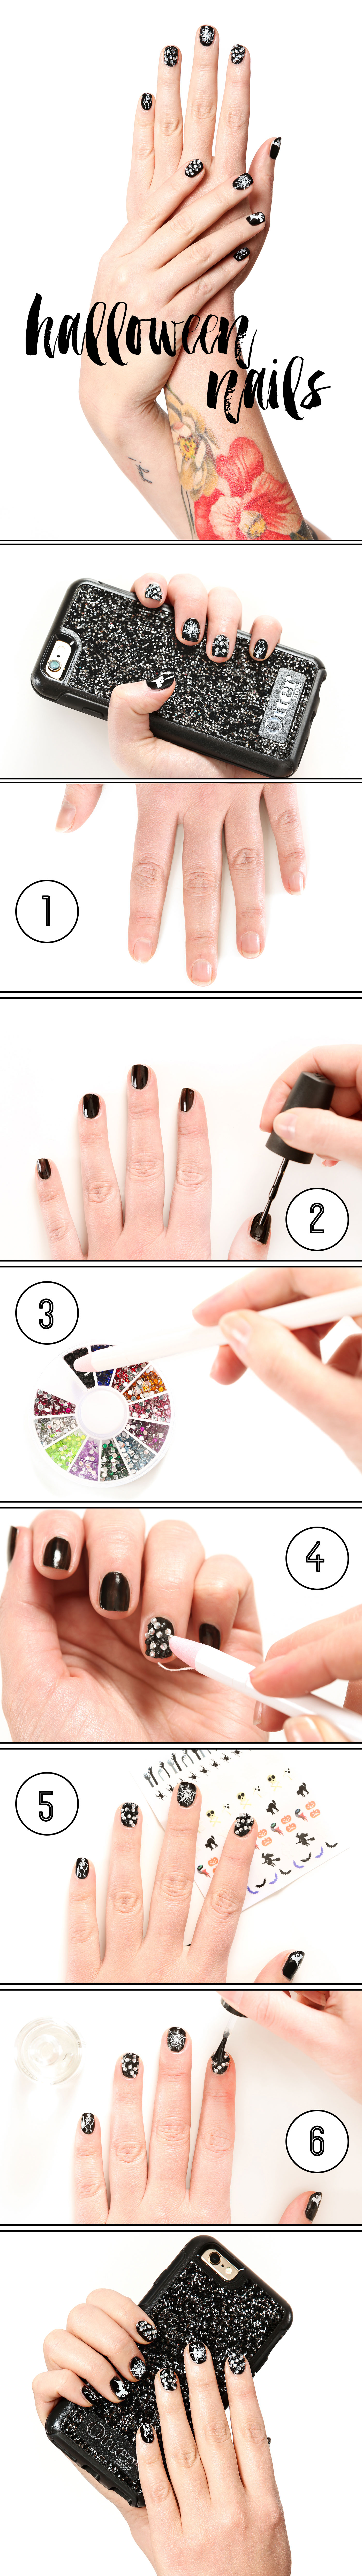 easy halloween nails / step by step simple nail art tutorial